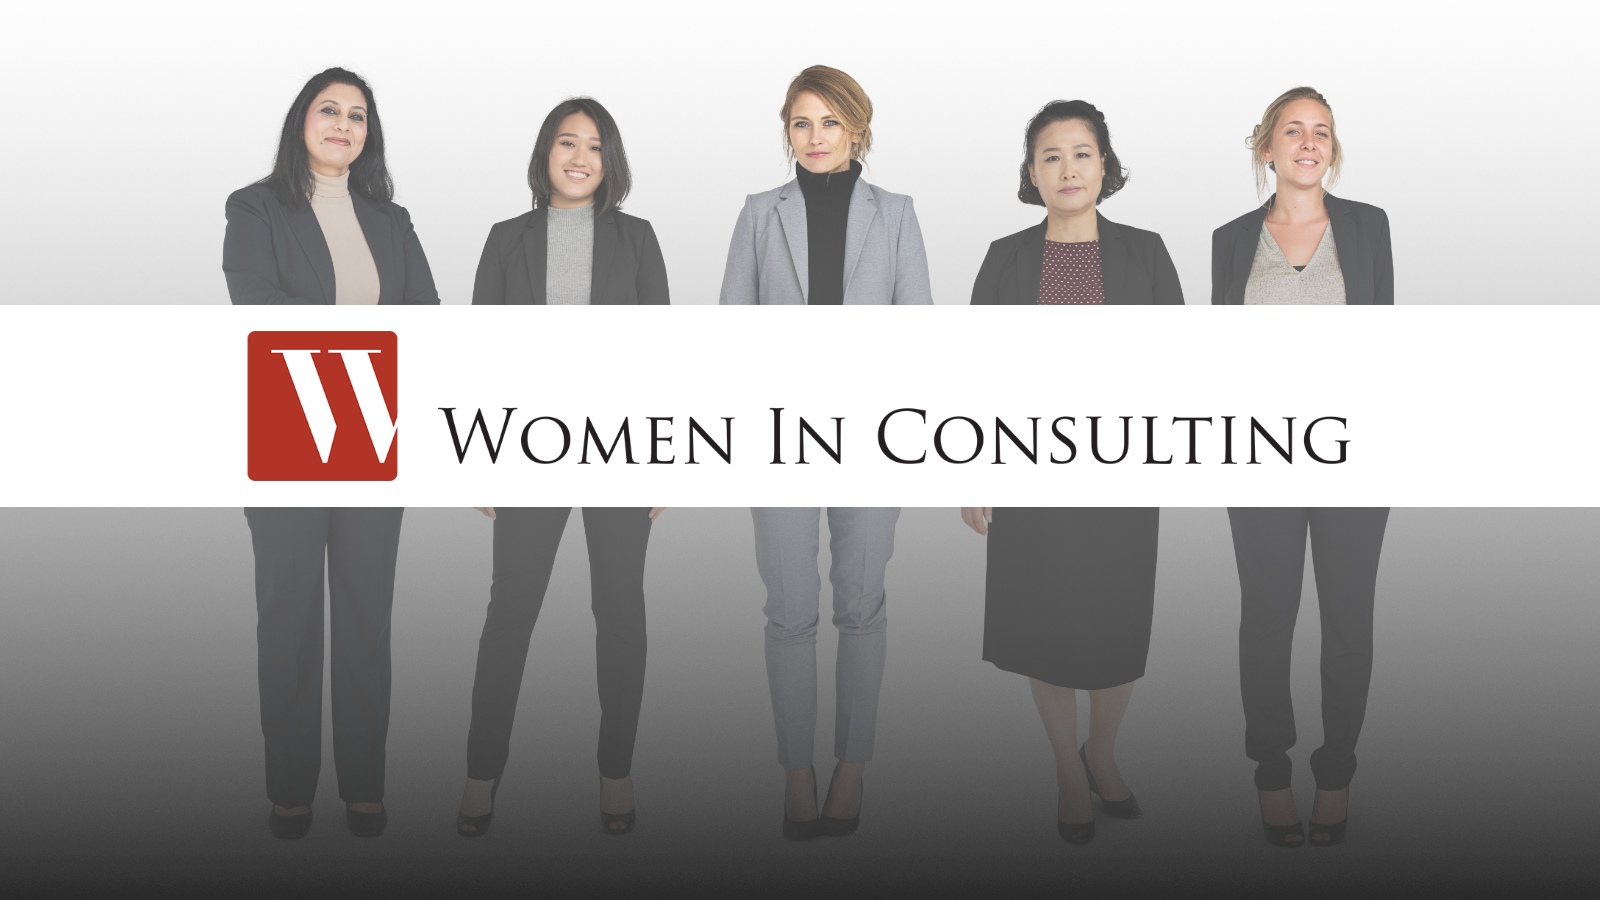 Women in Consulting